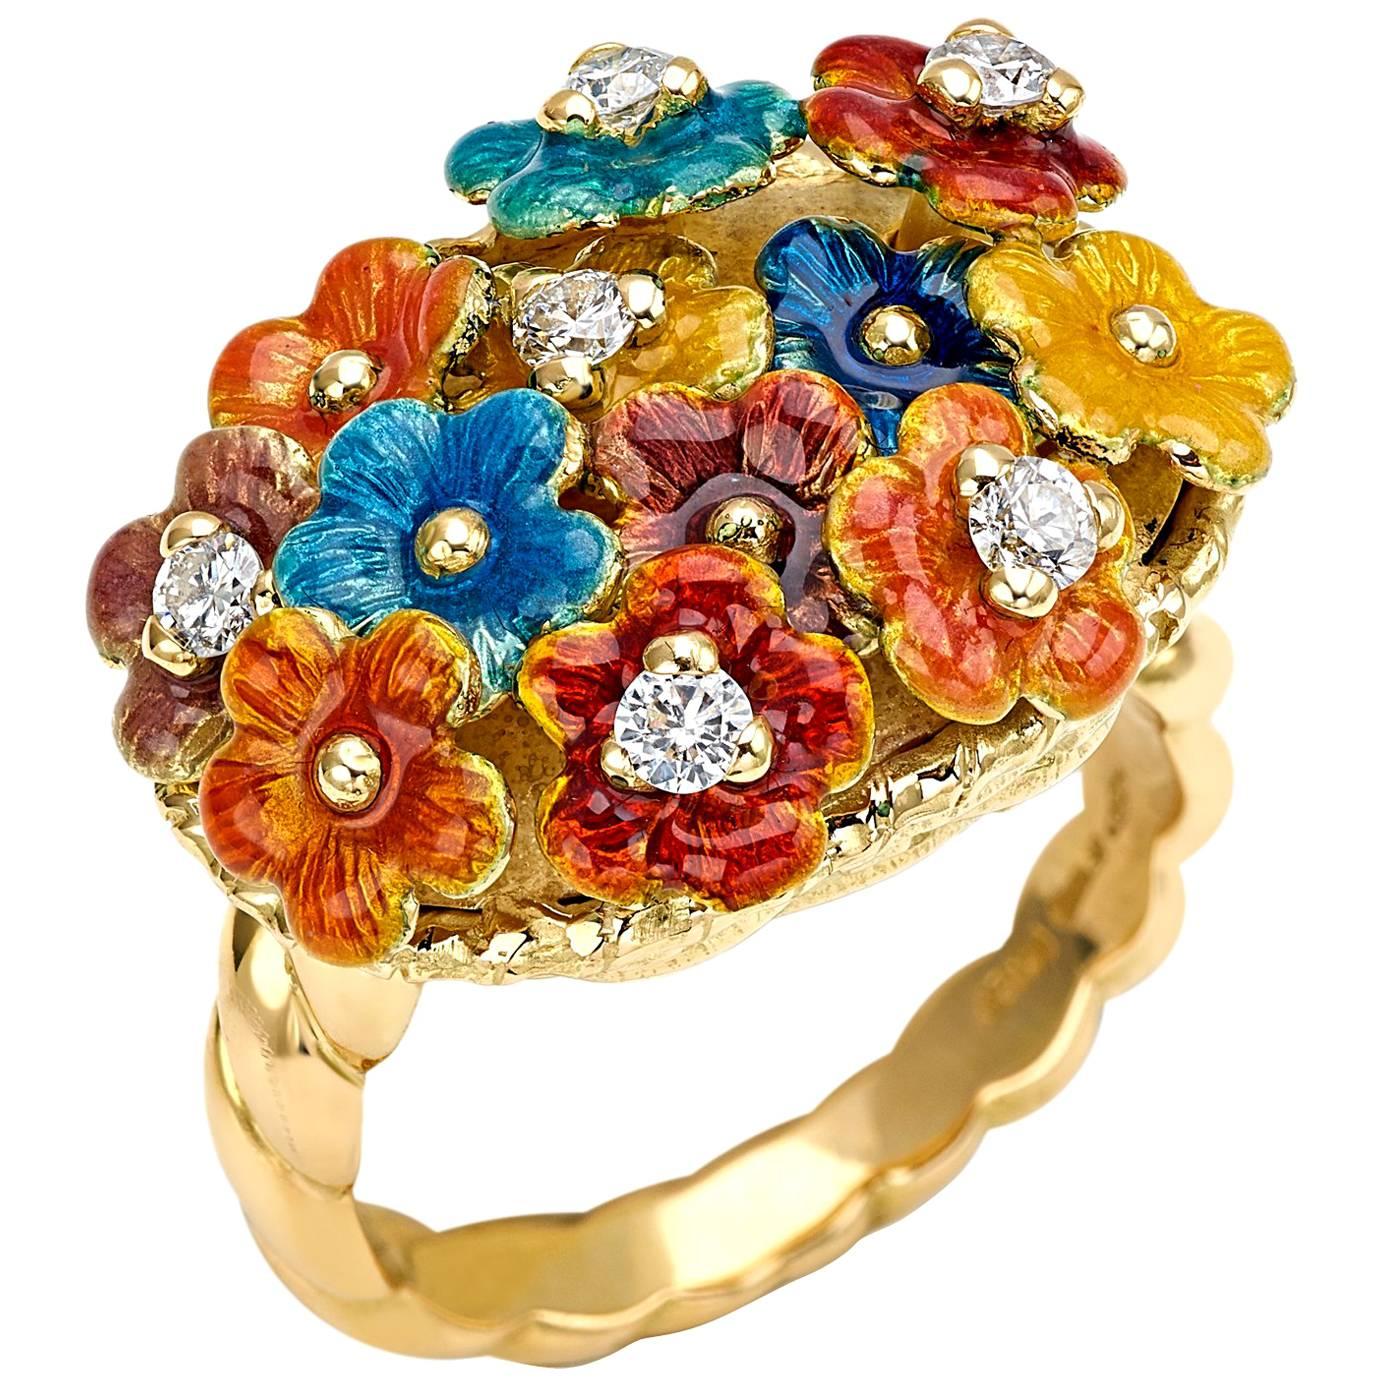 Ring from the Collection "Dreem" 18 Karat Yellow Gold and Diamonds